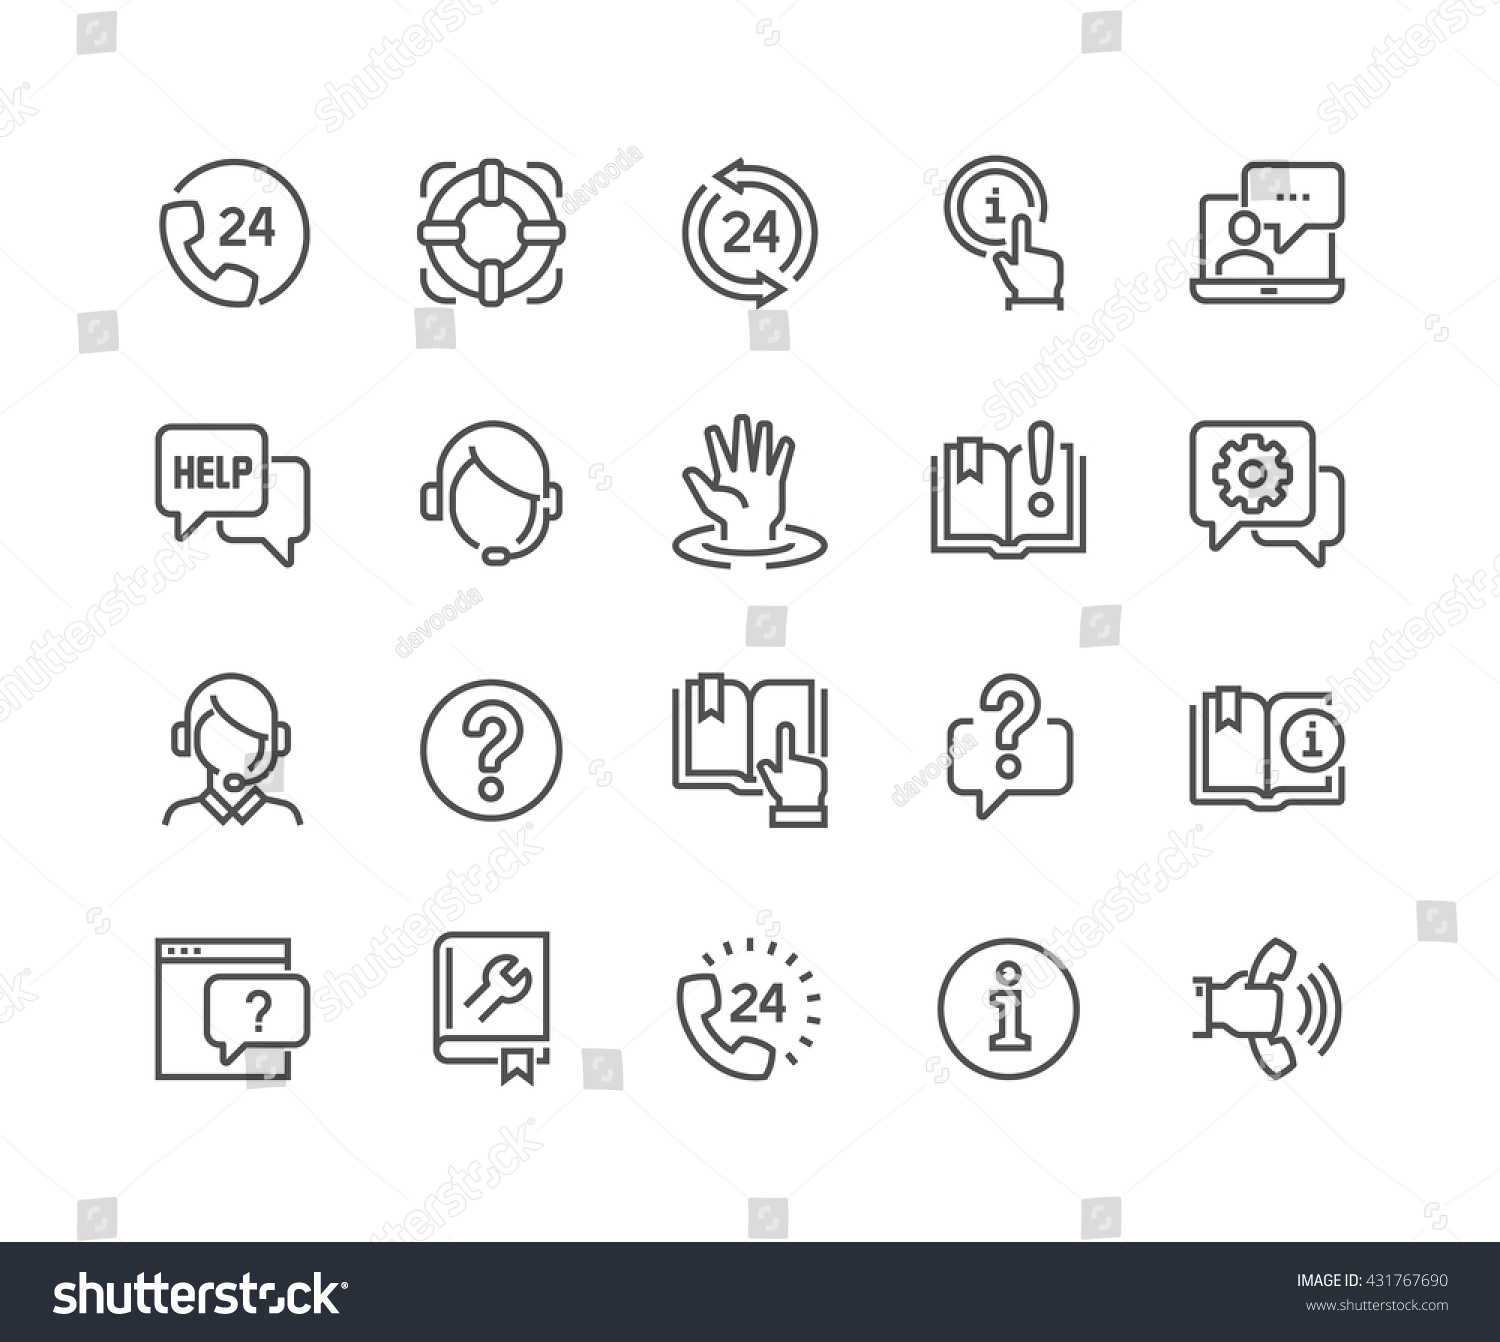 Simple Set of Help and Support Related Vector Line Icons. 
Contains such Icons as Phone Assistant, Online Help, Video Chat and more.
Editable Stroke. 48x48 Pixel Perfect.  #431767690